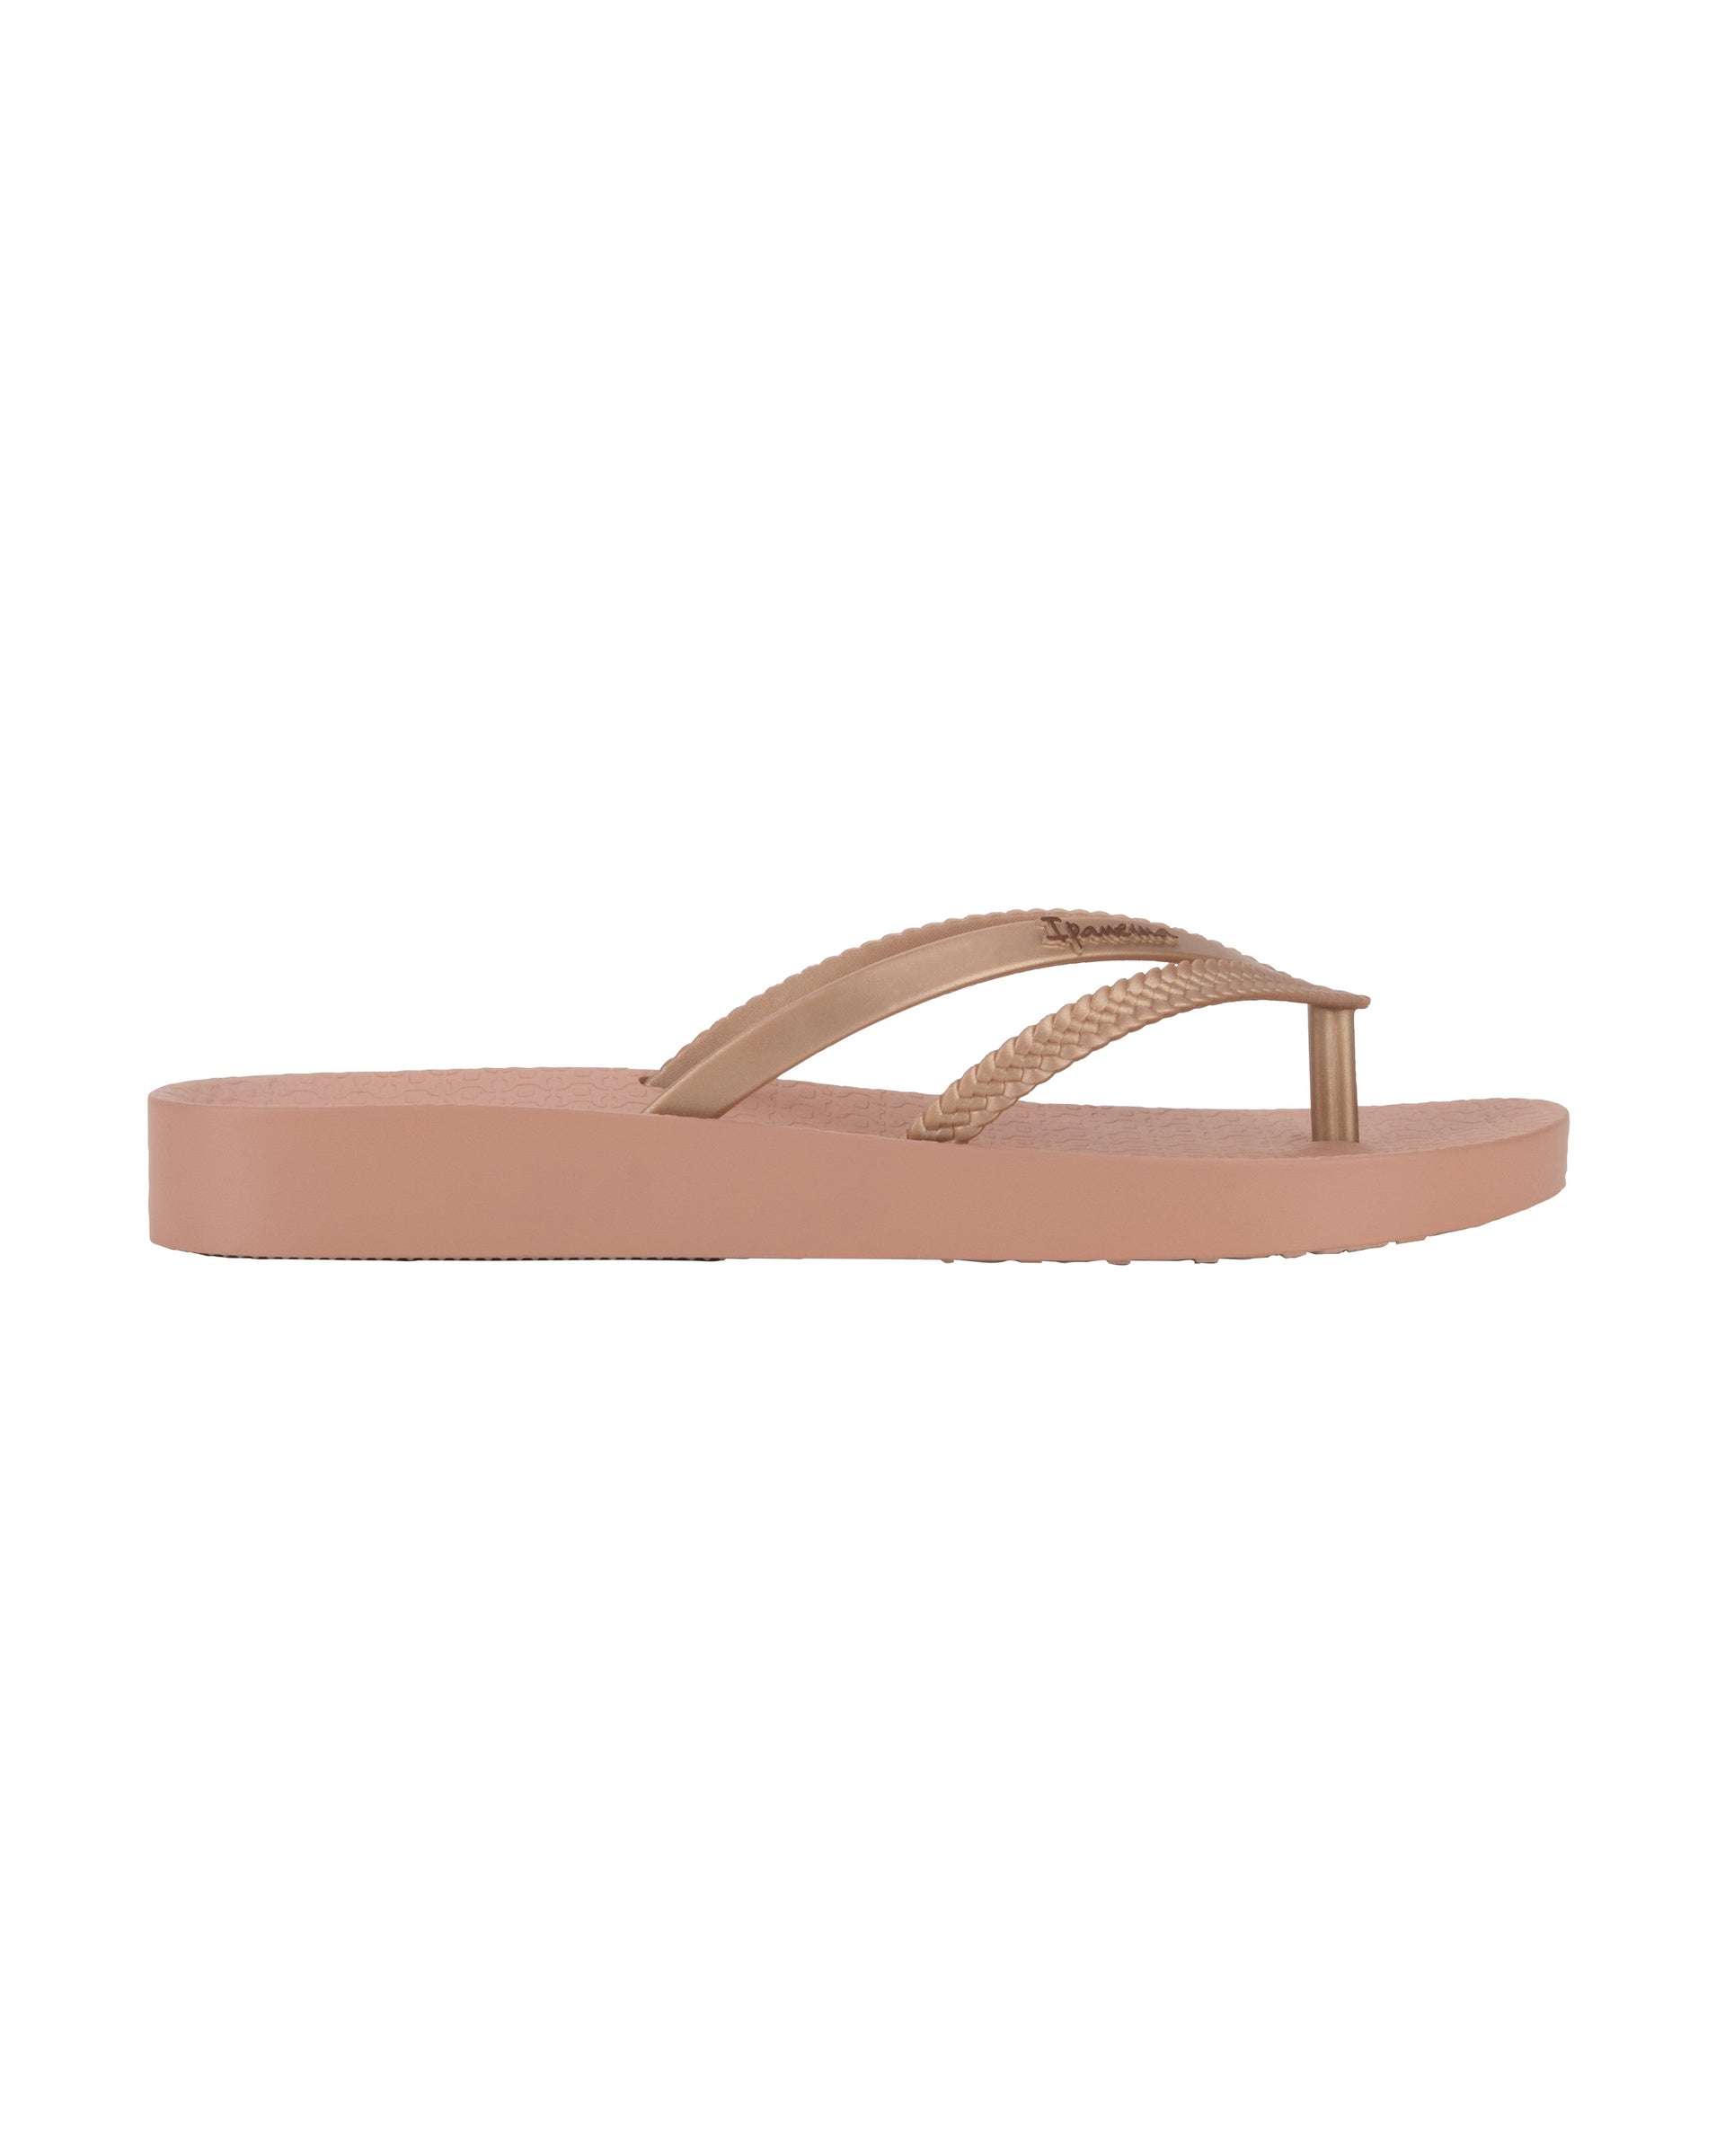 Outer side view of a pink Ipanema Bossa Soft women's flip flop with metallic rose gold straps.